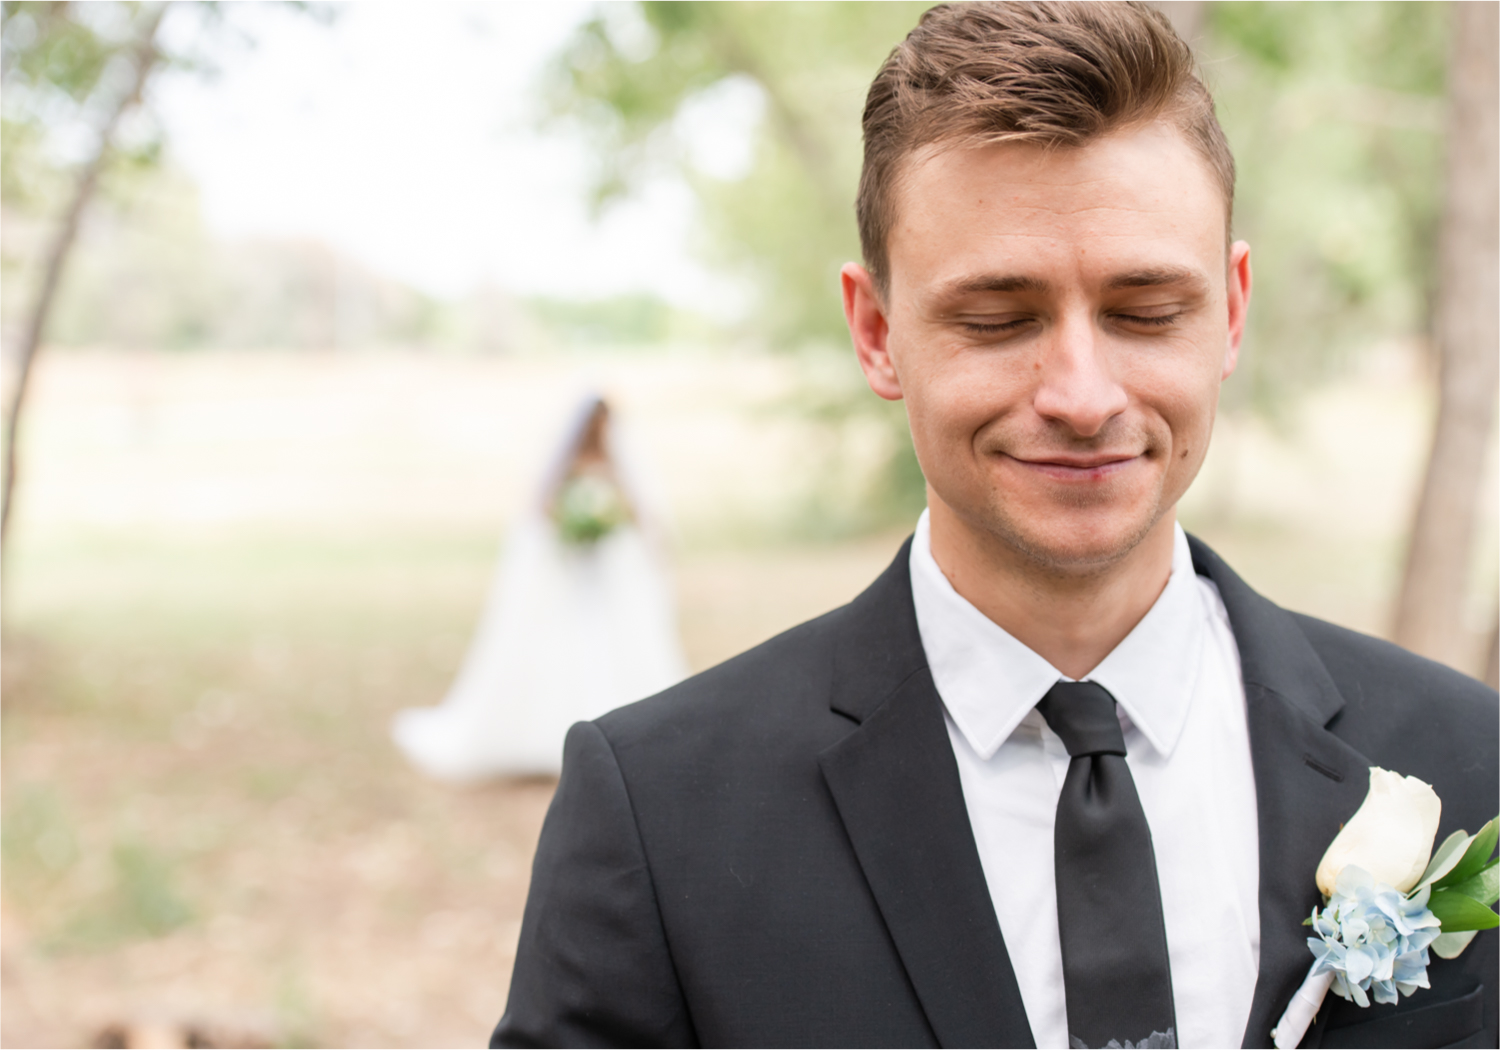 Romantic and Rustic Wedding at The Mill in Windsor | Britni Girard Photography | Colorado based wedding photography and videography team | Bride and Groom Portraits First Look at Eastman Park